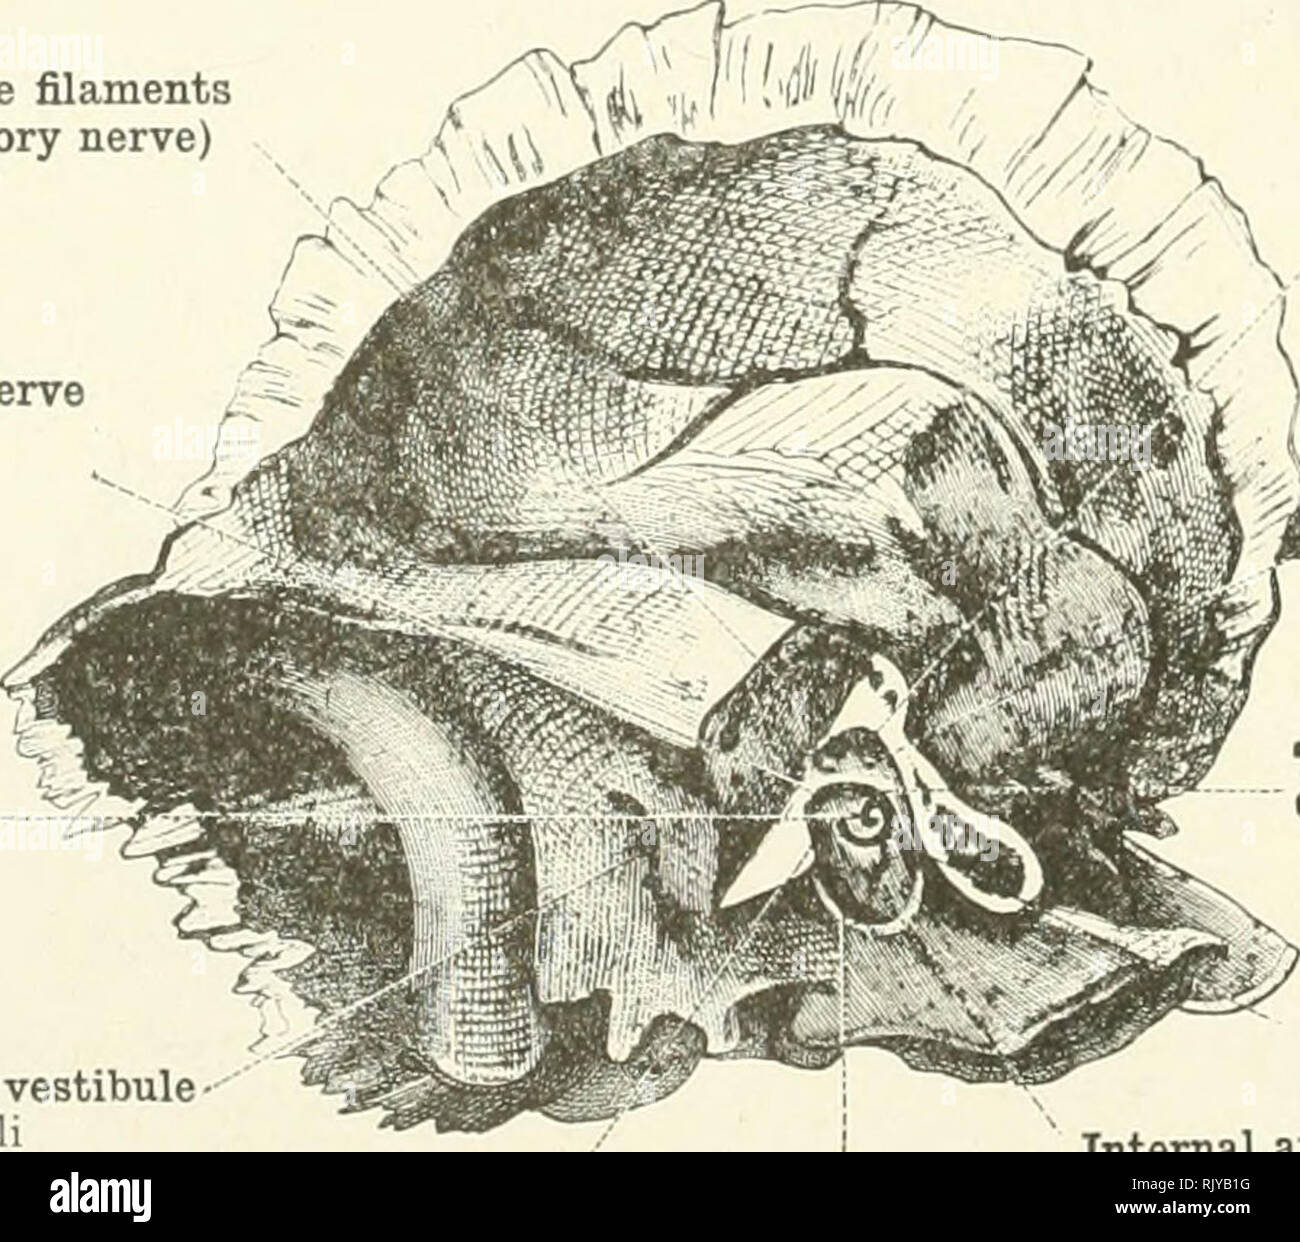 . An atlas of human anatomy for students and physicians. Anatomy. External semicircular canal Canalis semicircularis lateralis Superior border of the petrous bone 'Angulus supers ir pj I Posterior semicircular canal Canalis semicircularis posterior Posterior surface of the petrous bone Facies posterior pyramidis Promontory Promontorium Aqueduct of Fallopius Canalis facialis s. Fossula of the fenestra rotunda, or fossula rotunda Fossula fenestra; cochlea; Fenestra ovalis Fenestra vestibuli Fig. 139.—The Bony Labyrinth, Labyrinthus Osseus, shown in the Left Petrous Portion. Seen obliquely from i Stock Photo